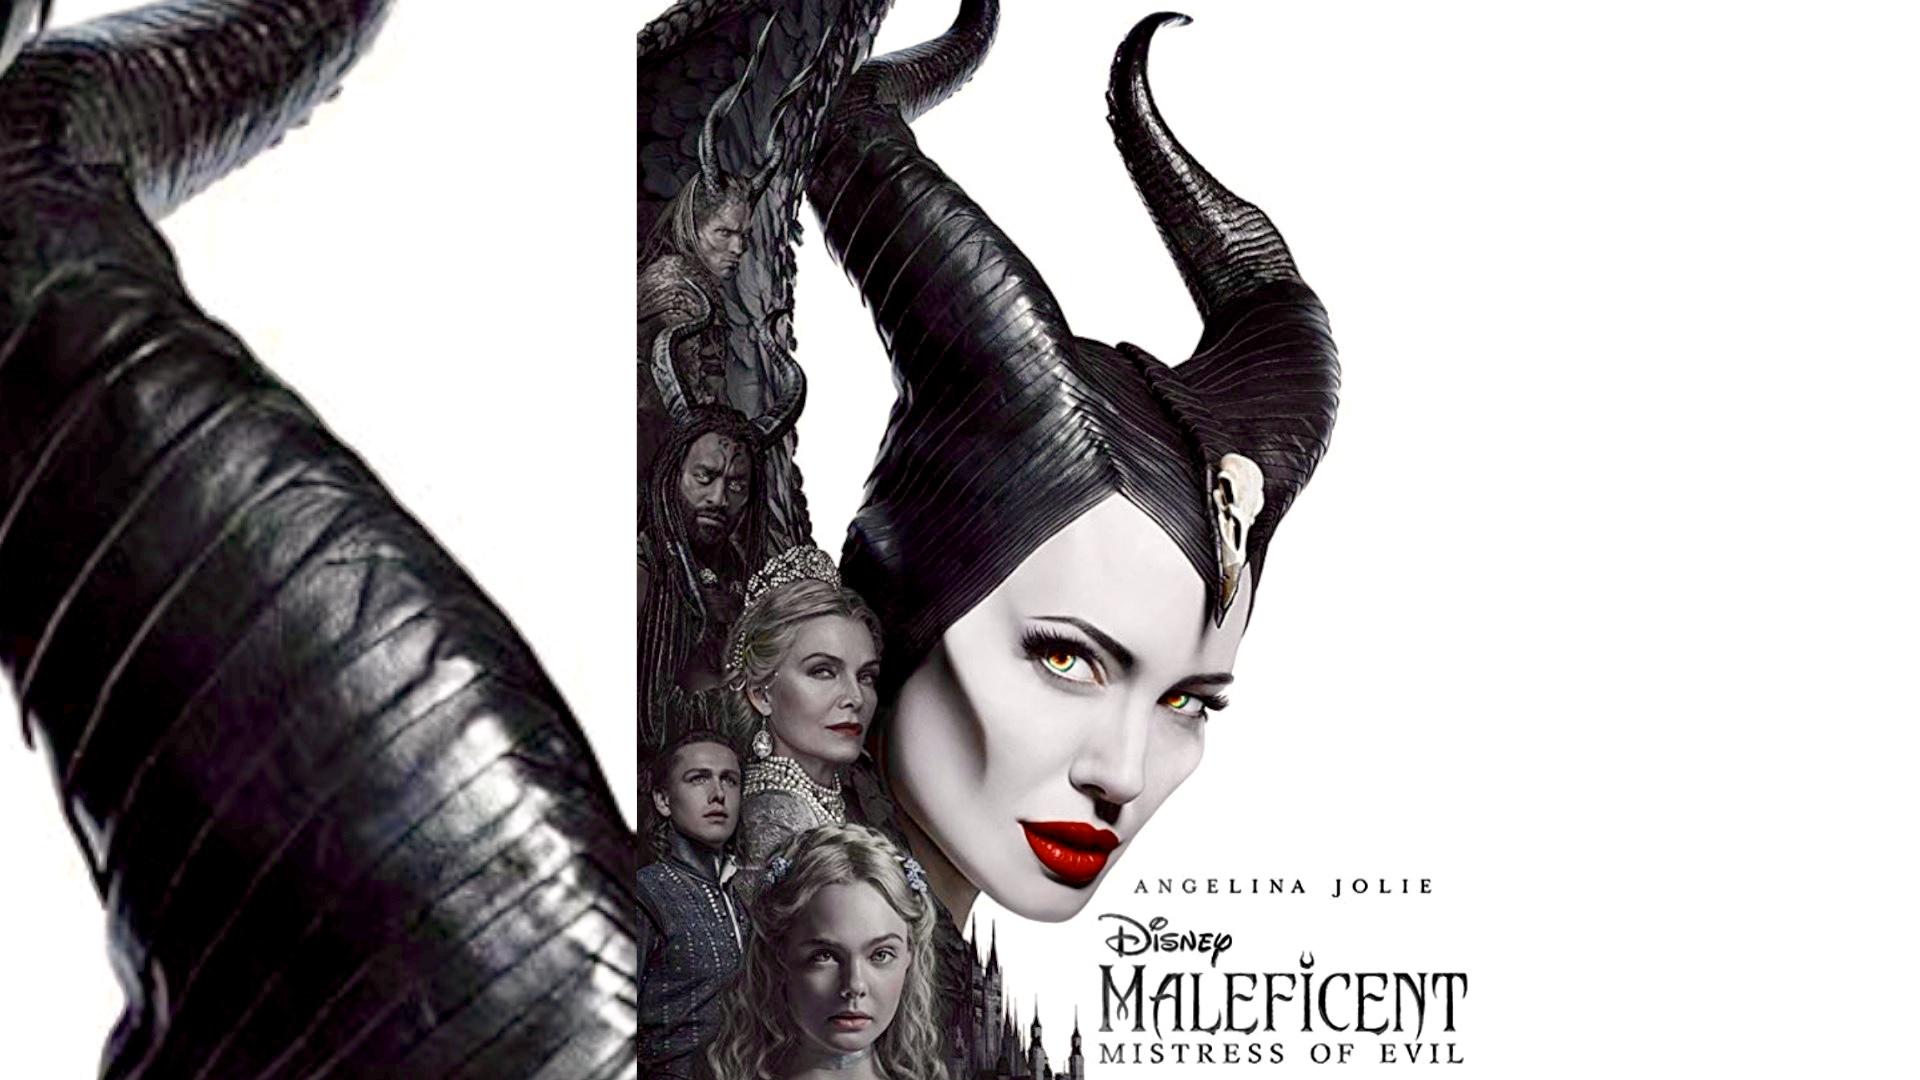 angelina-jolie-maleficent-mistress-of-evil-wallpapers-87890-199734-6547469....